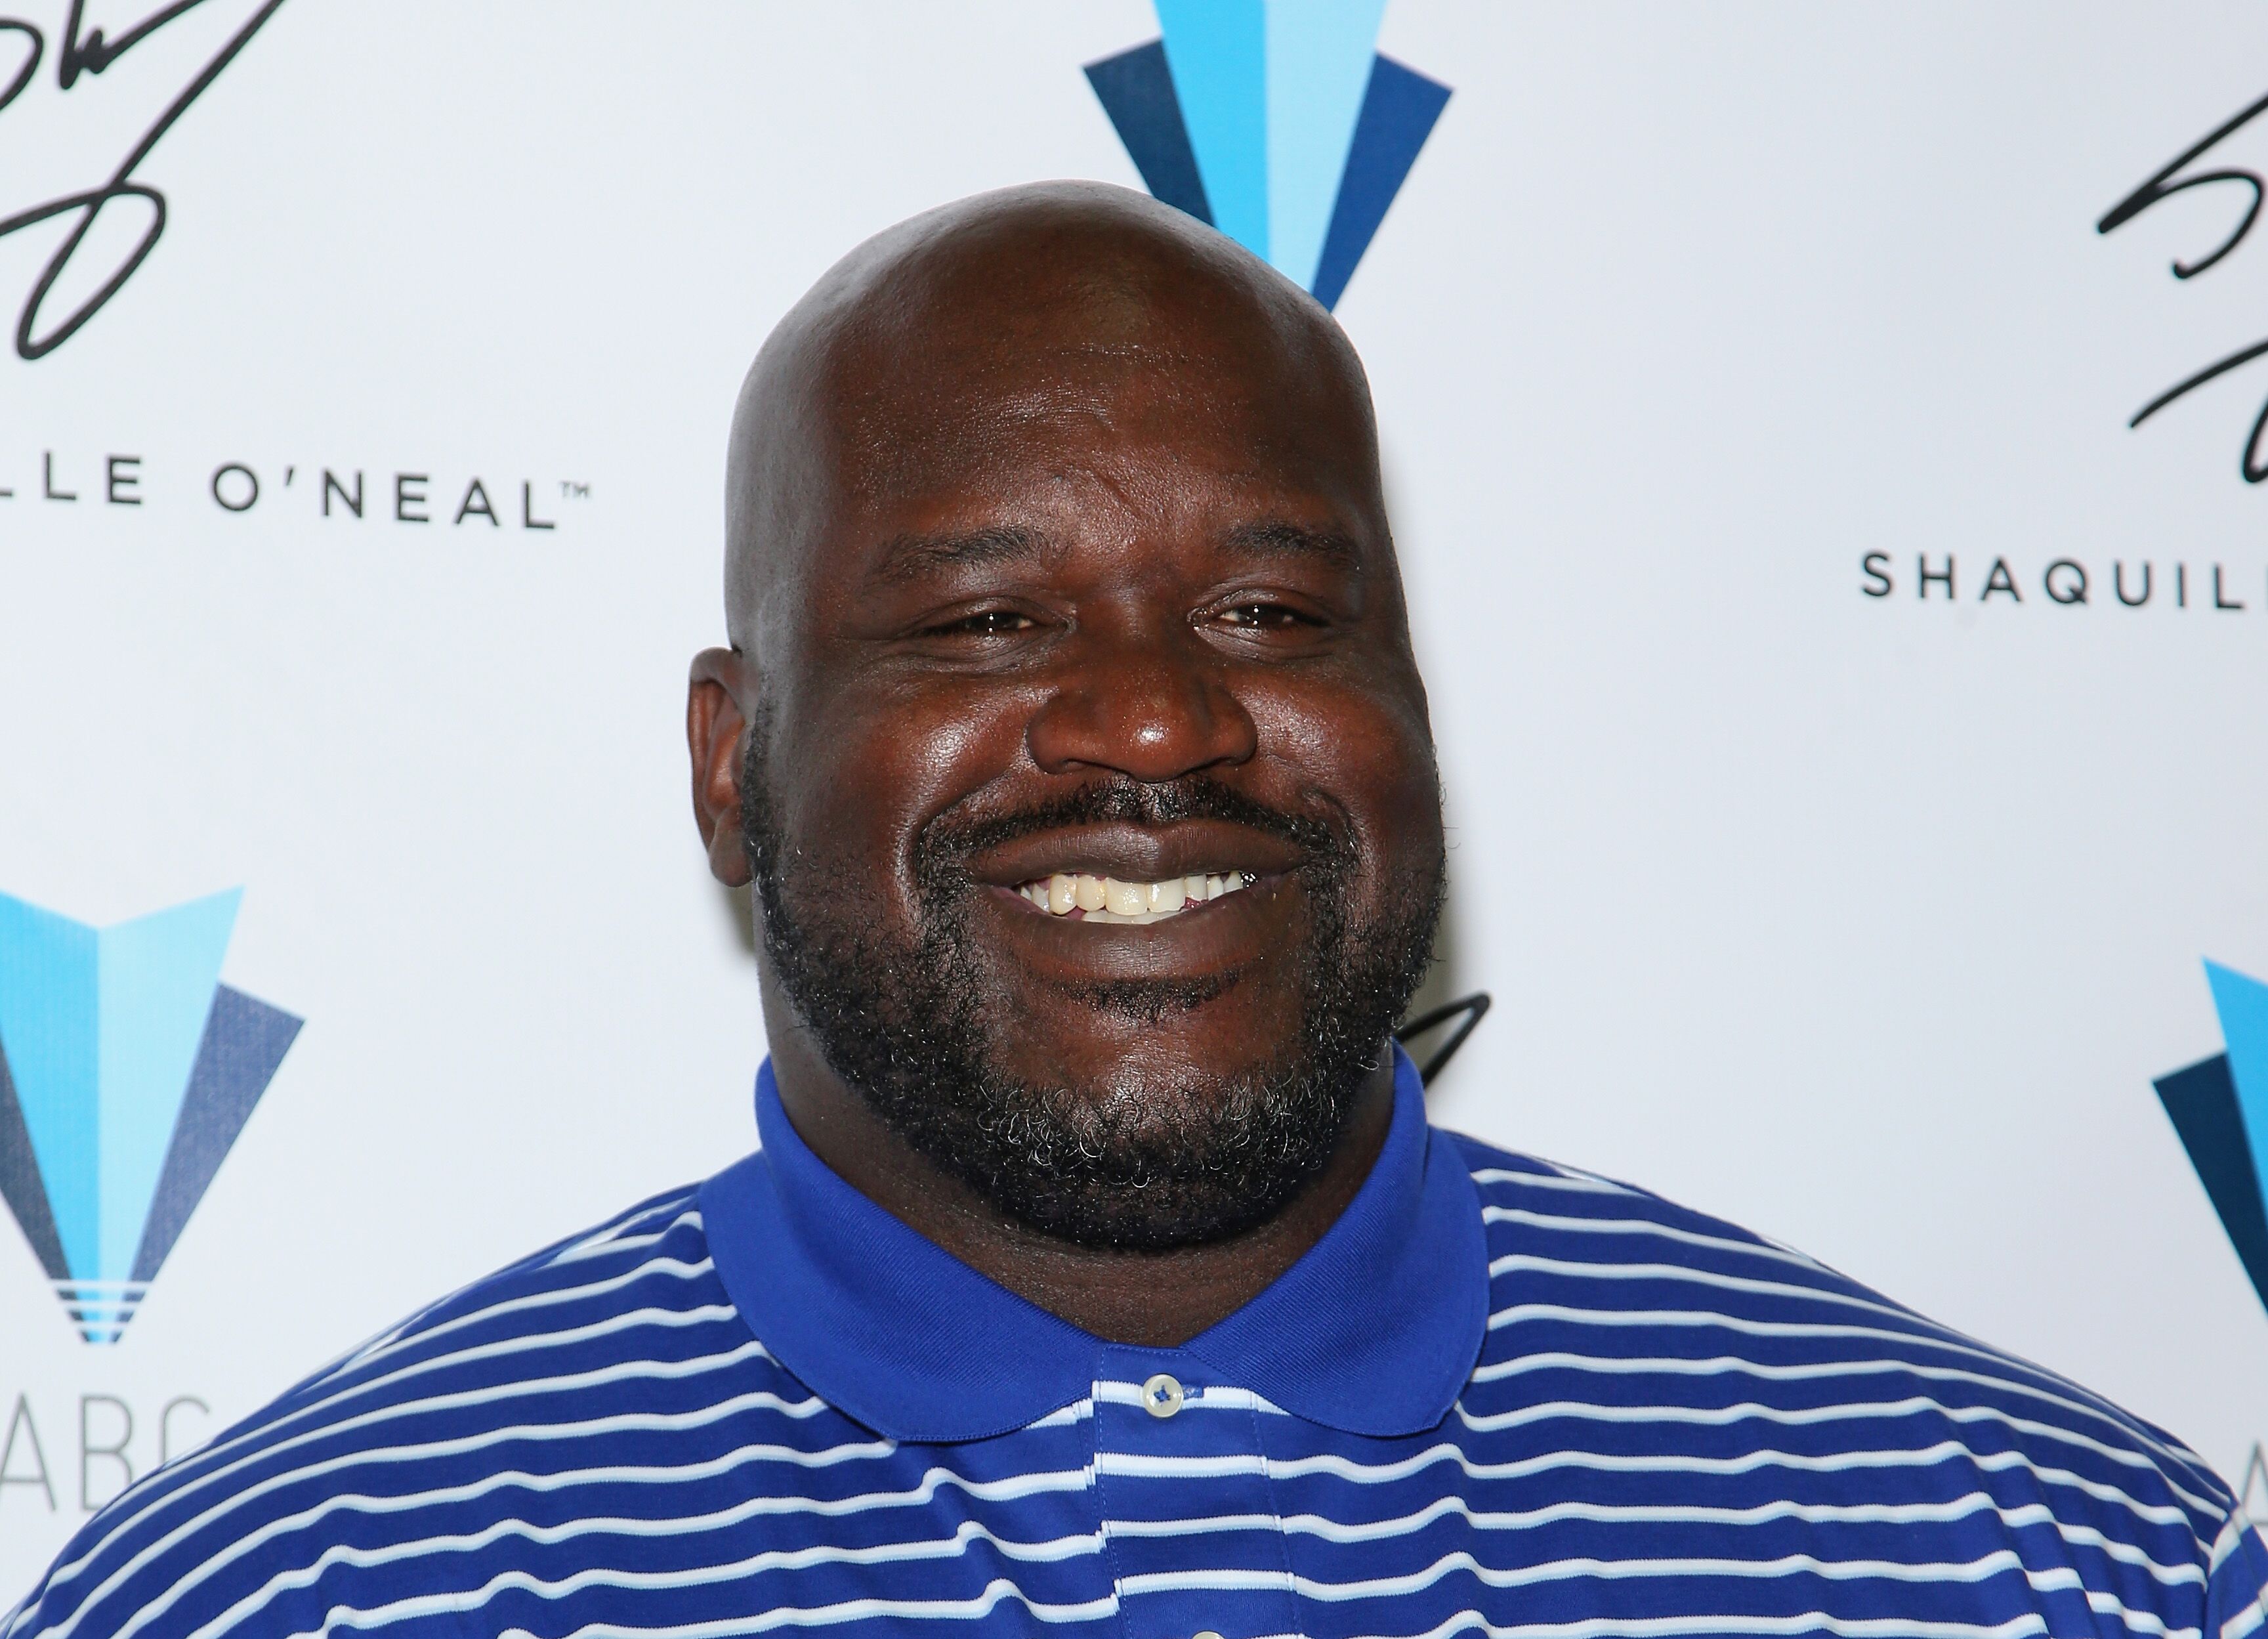 shaquille neal shaunie nba he wife married once oneal admits doesn brands marriage ended before discussing prohibited producer wives relationship